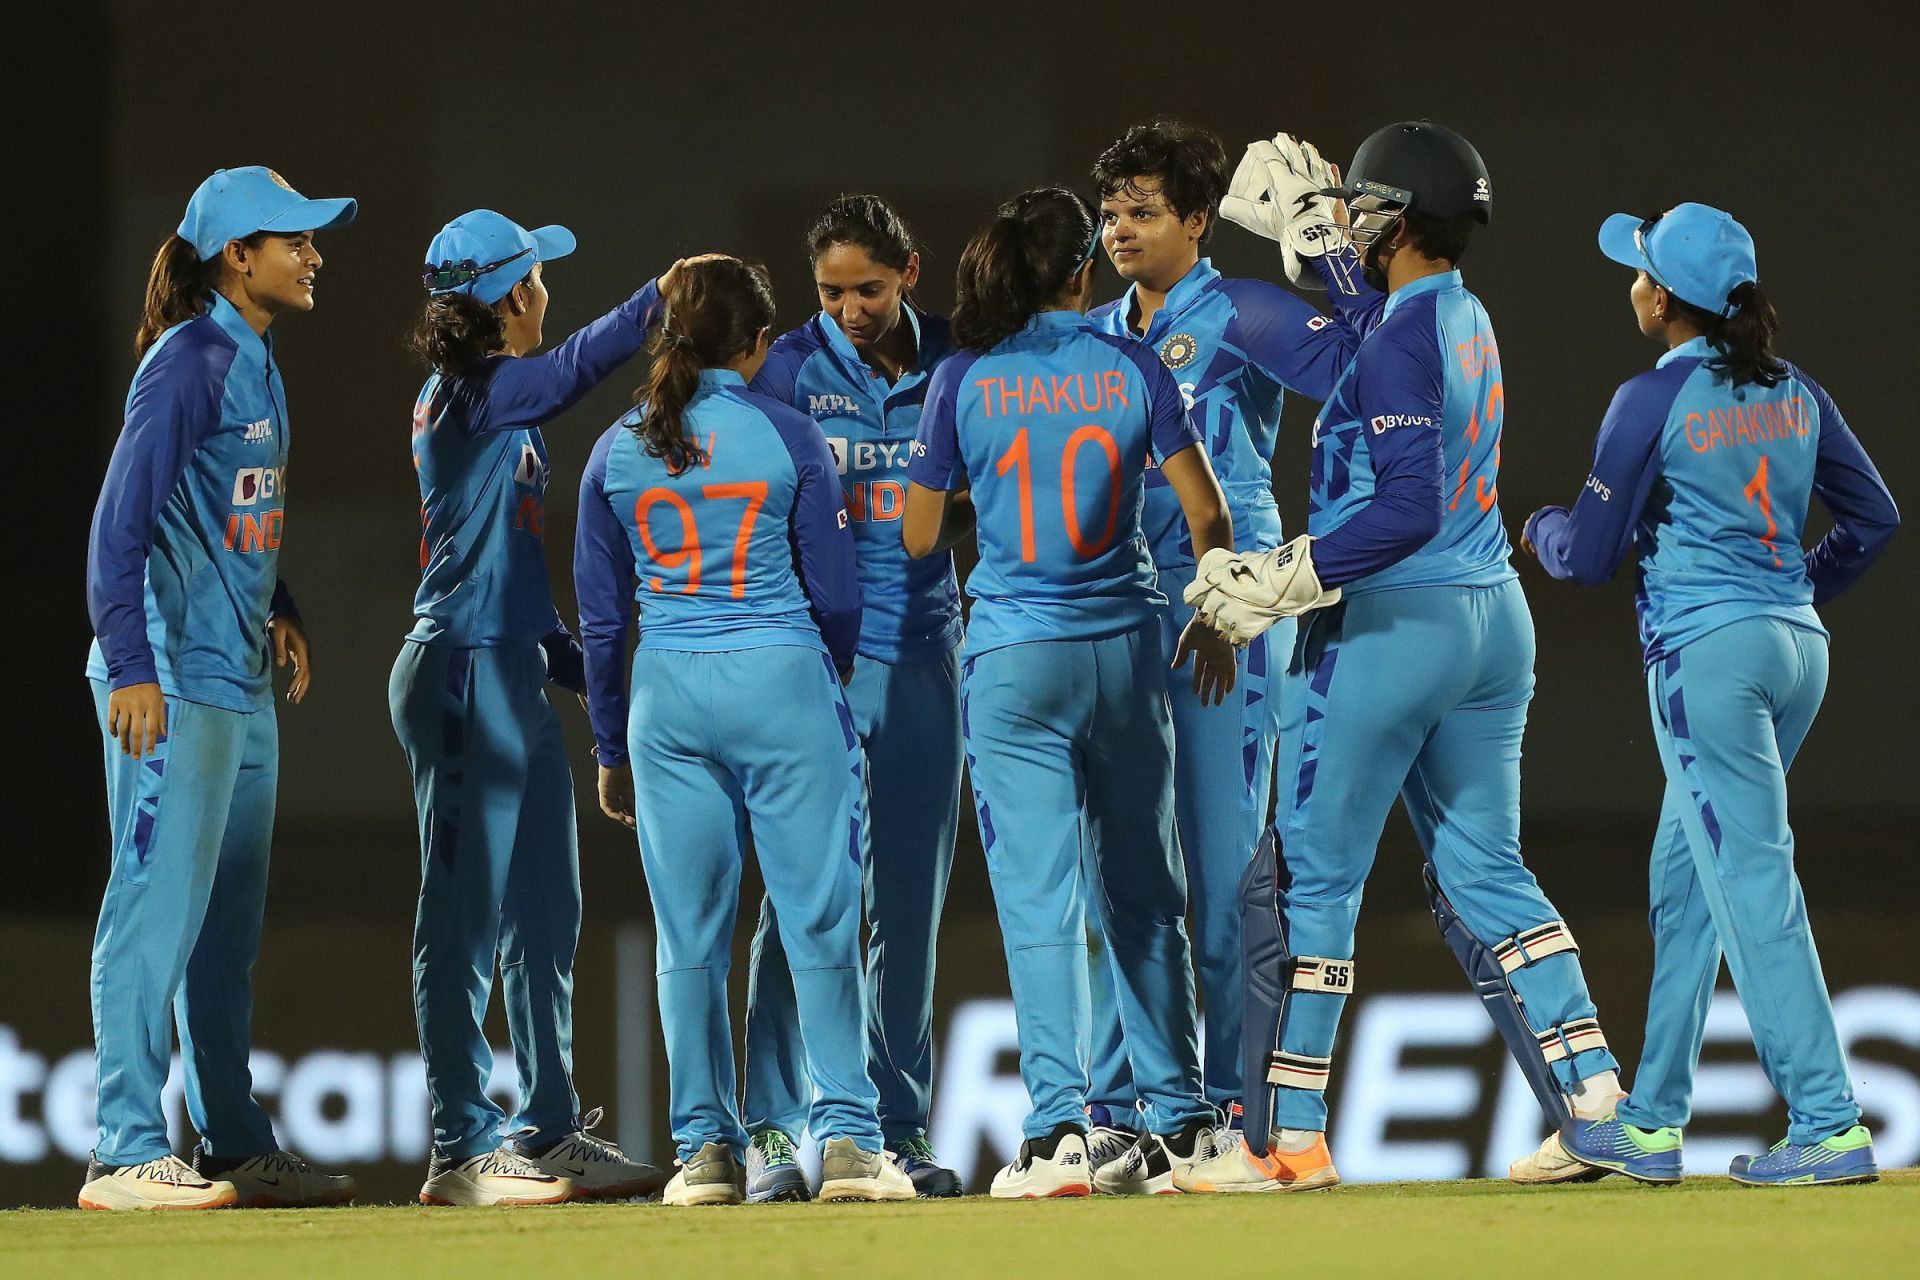 India will look to fine-tune their combination despite the absence of Shafali Verma and Richa Ghosh. (Image: Twitter/BCCIWomen)